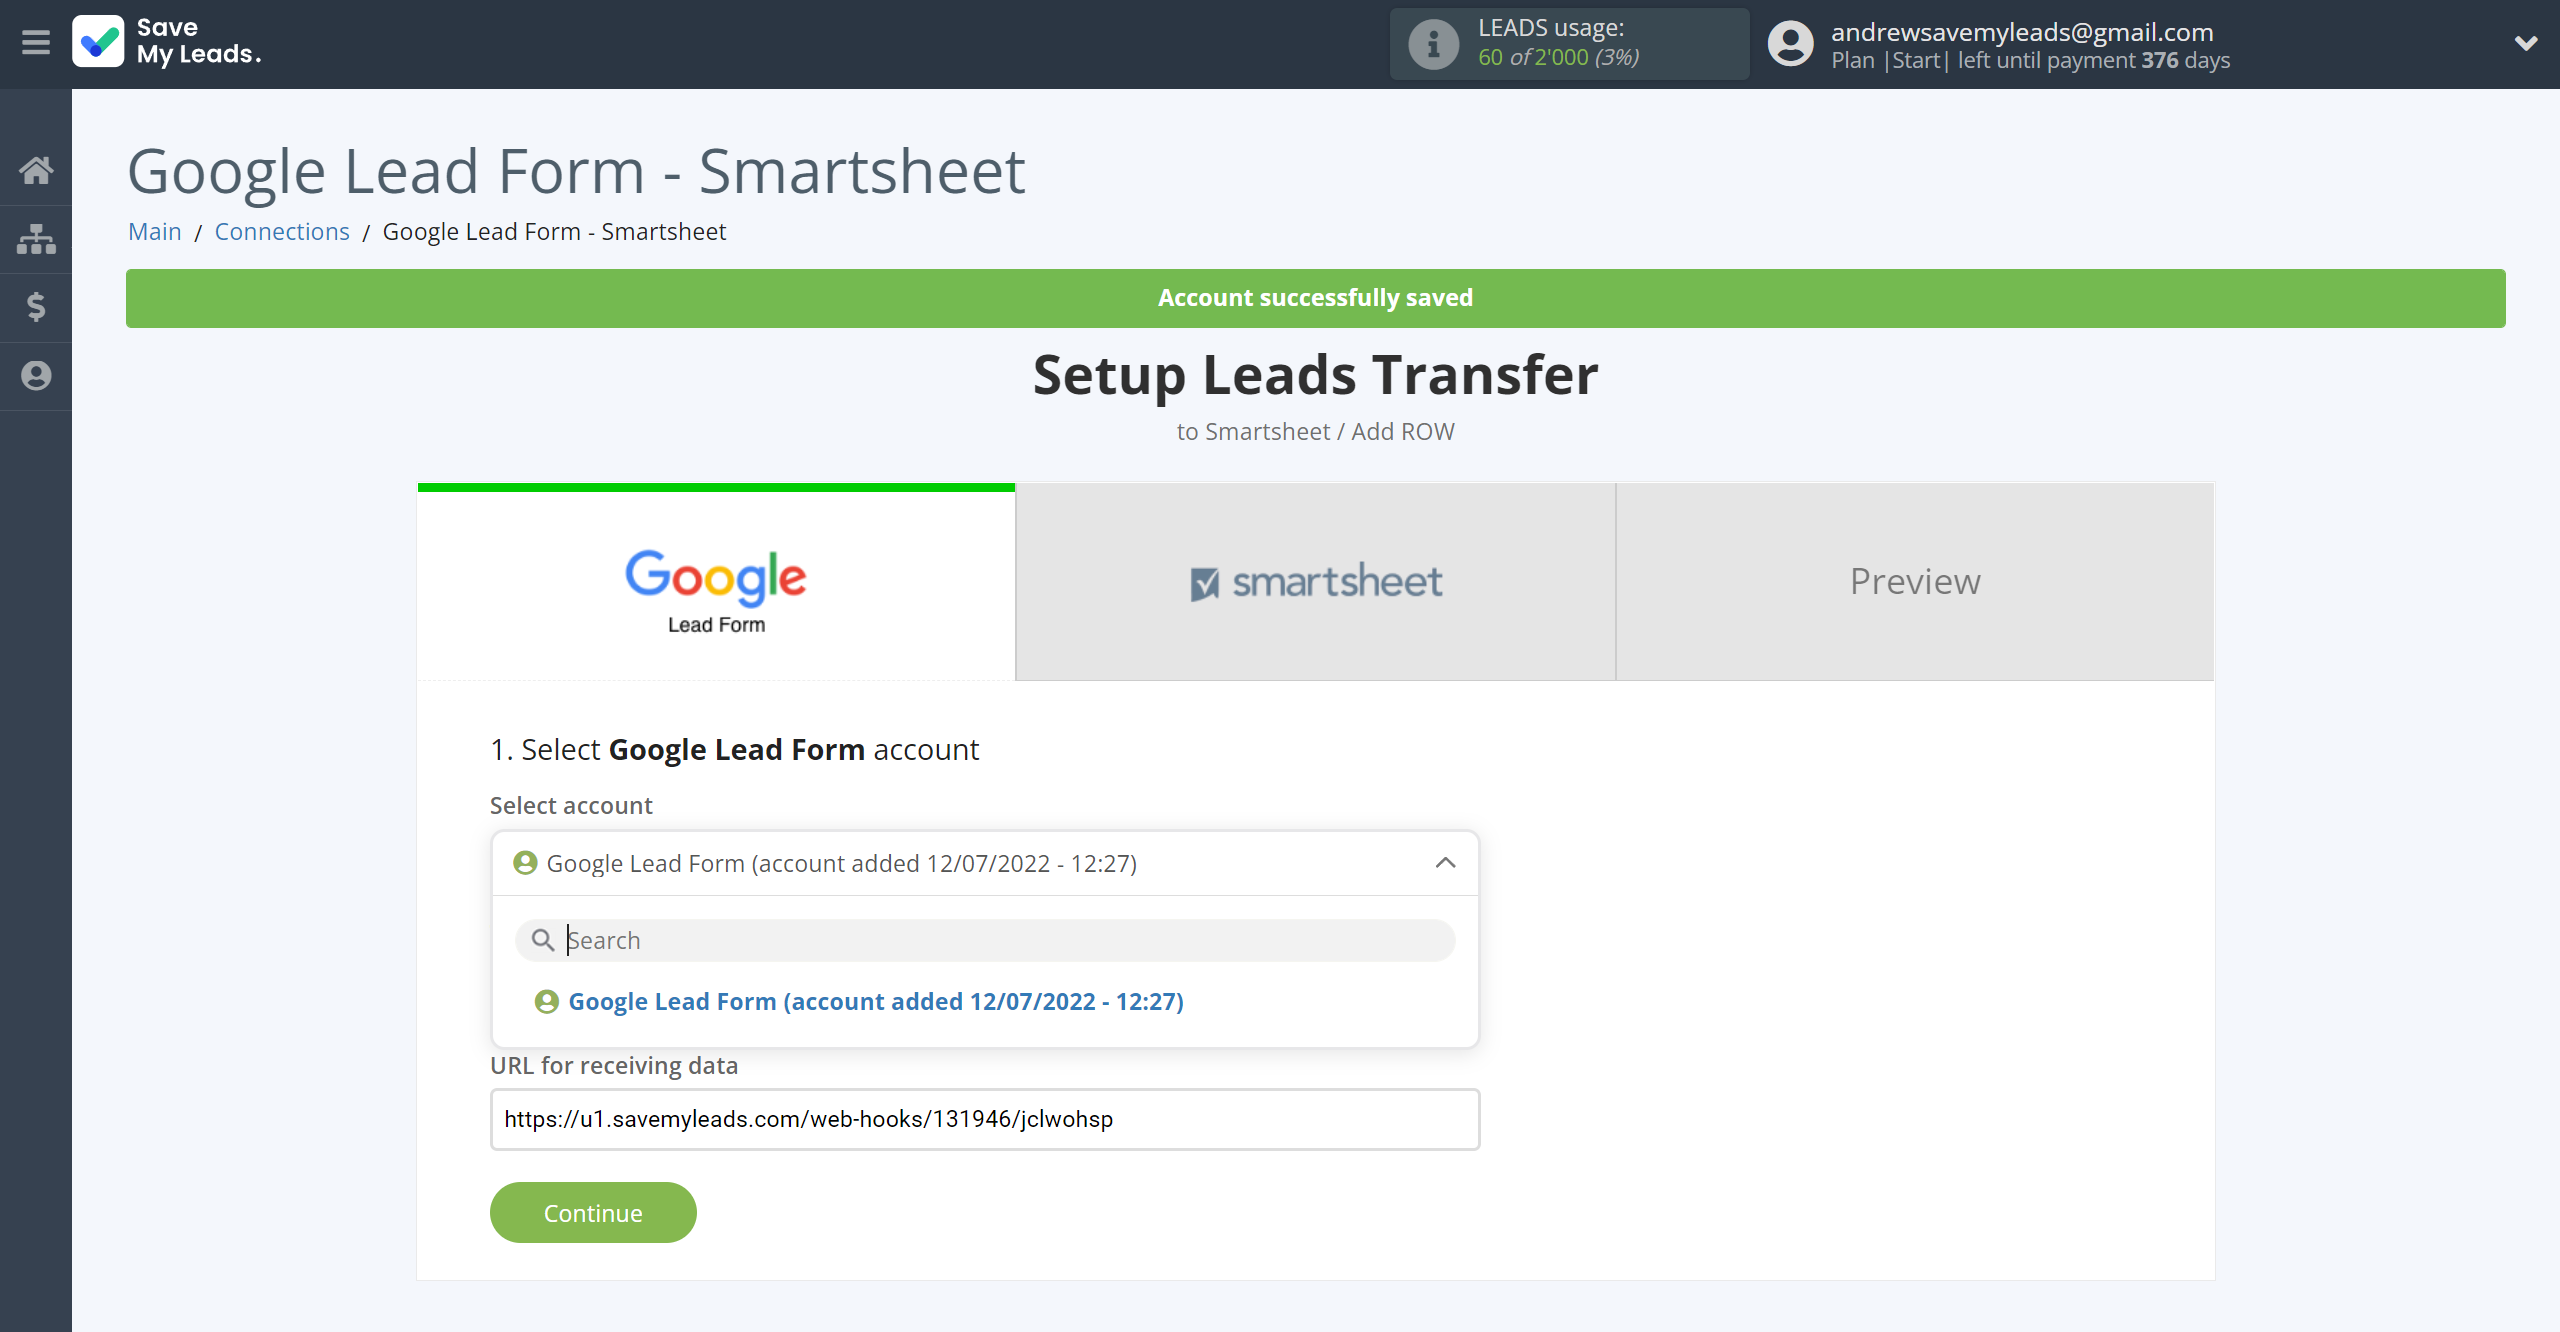 How to Connect Google Lead Form with Smartsheet | Data Source account selection